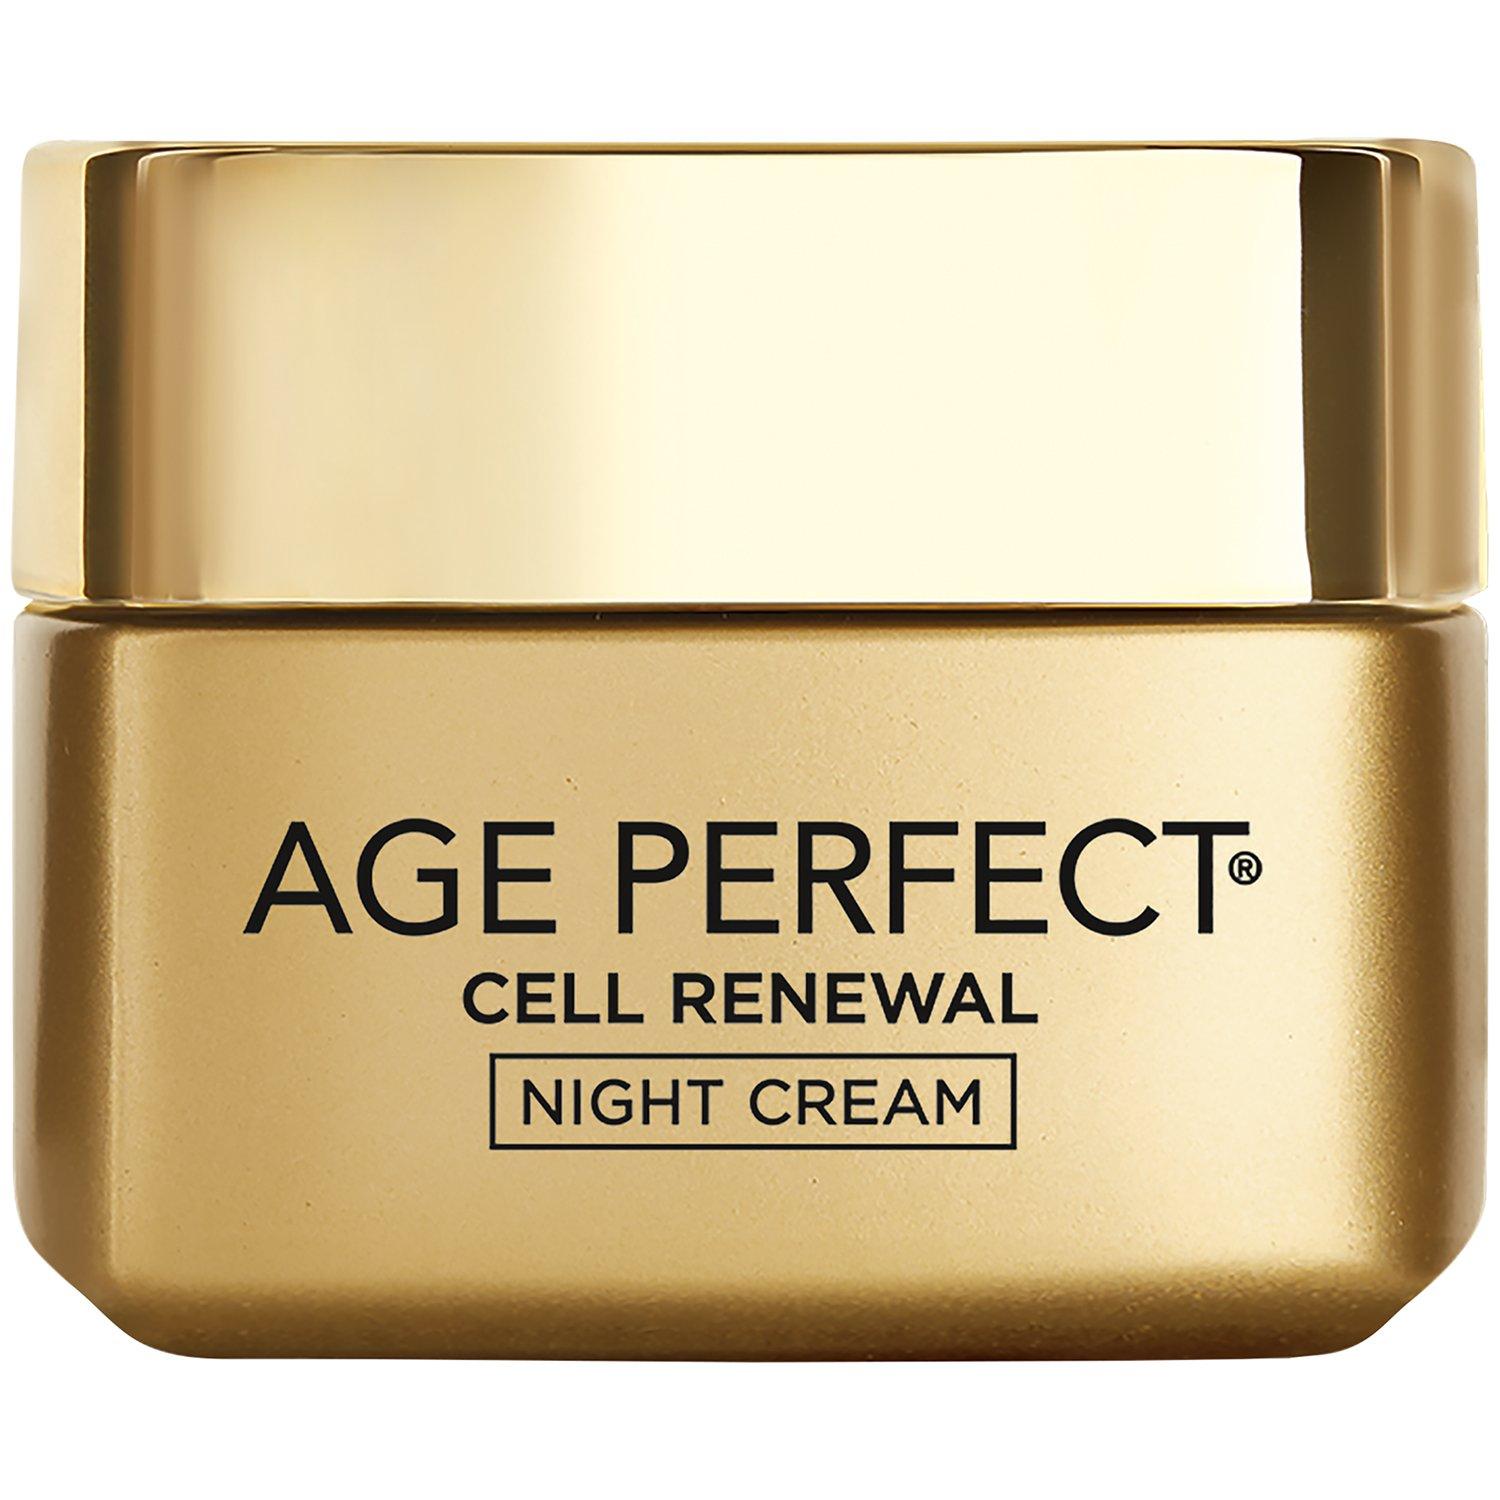 Age Perfect Cell Renewal Night Cream